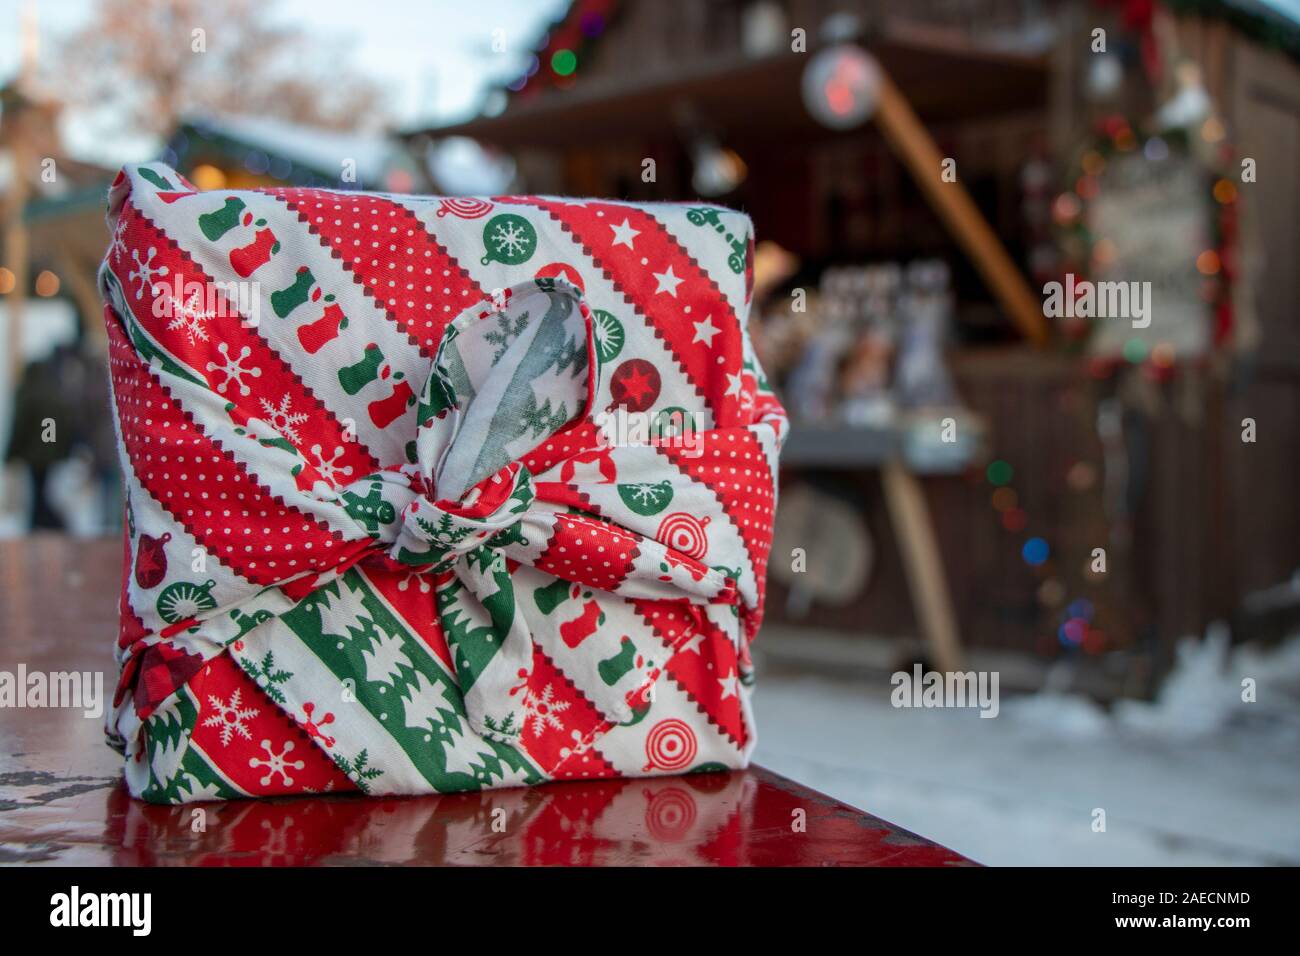 Zero Waste Reusable Fabric Wrap Gift with Christmas Market in background,  Québec, Canada Stock Photo - Alamy